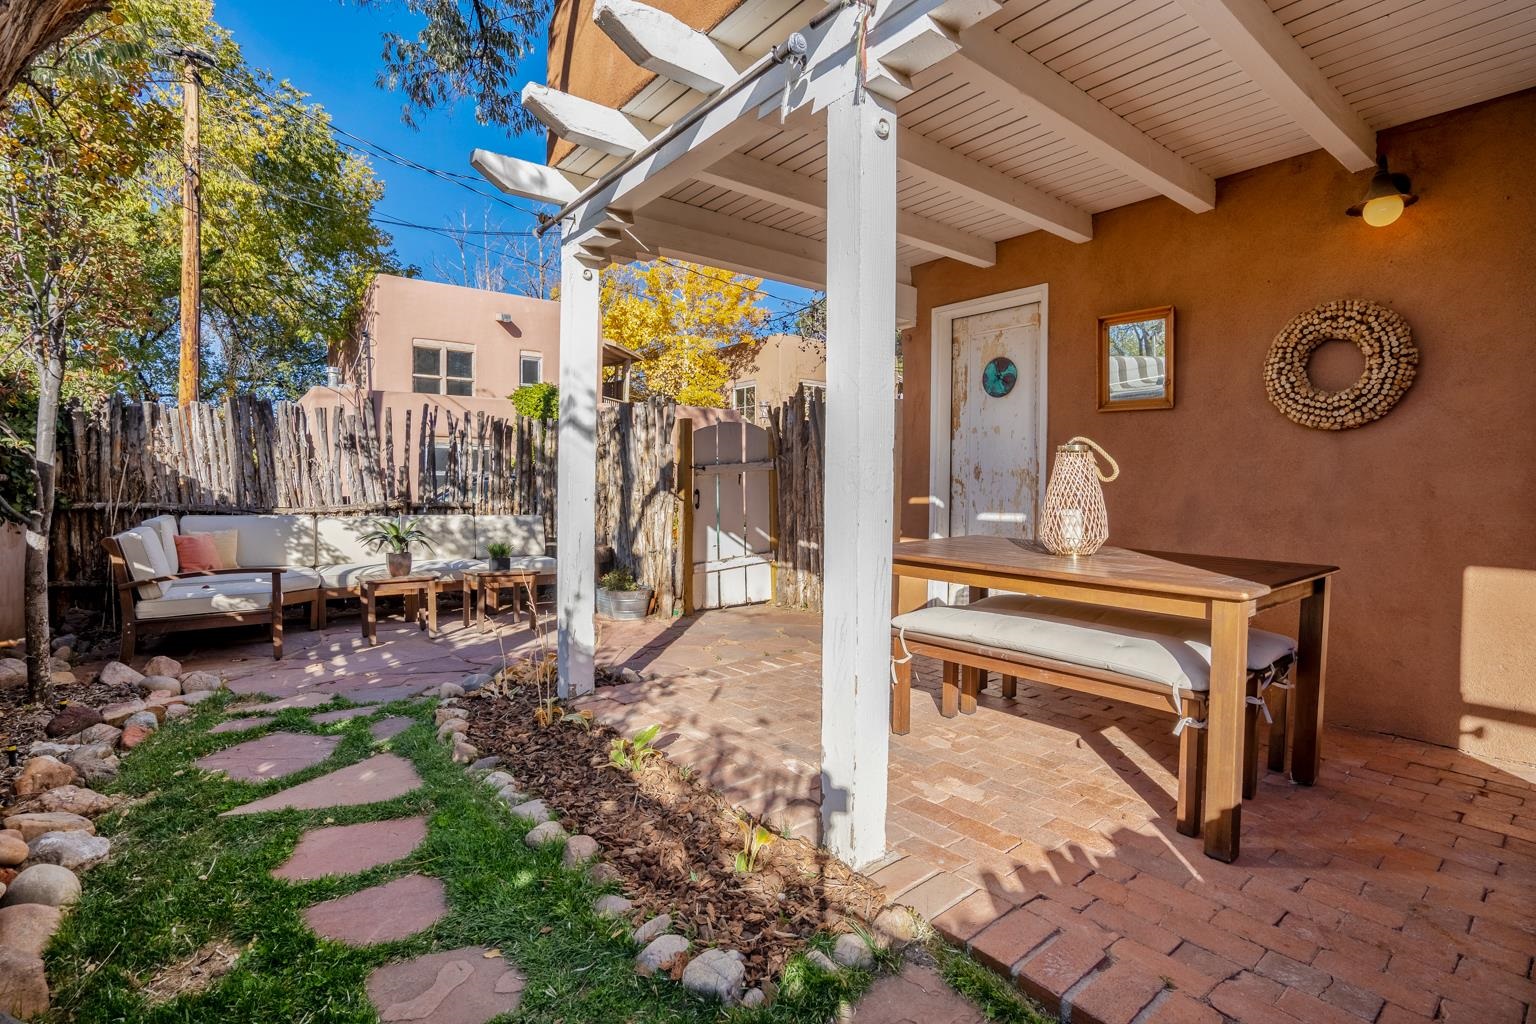 129 Berger, Santa Fe, New Mexico 87505, 2 Bedrooms Bedrooms, ,2 BathroomsBathrooms,Residential,For Sale,129 Berger,202104826